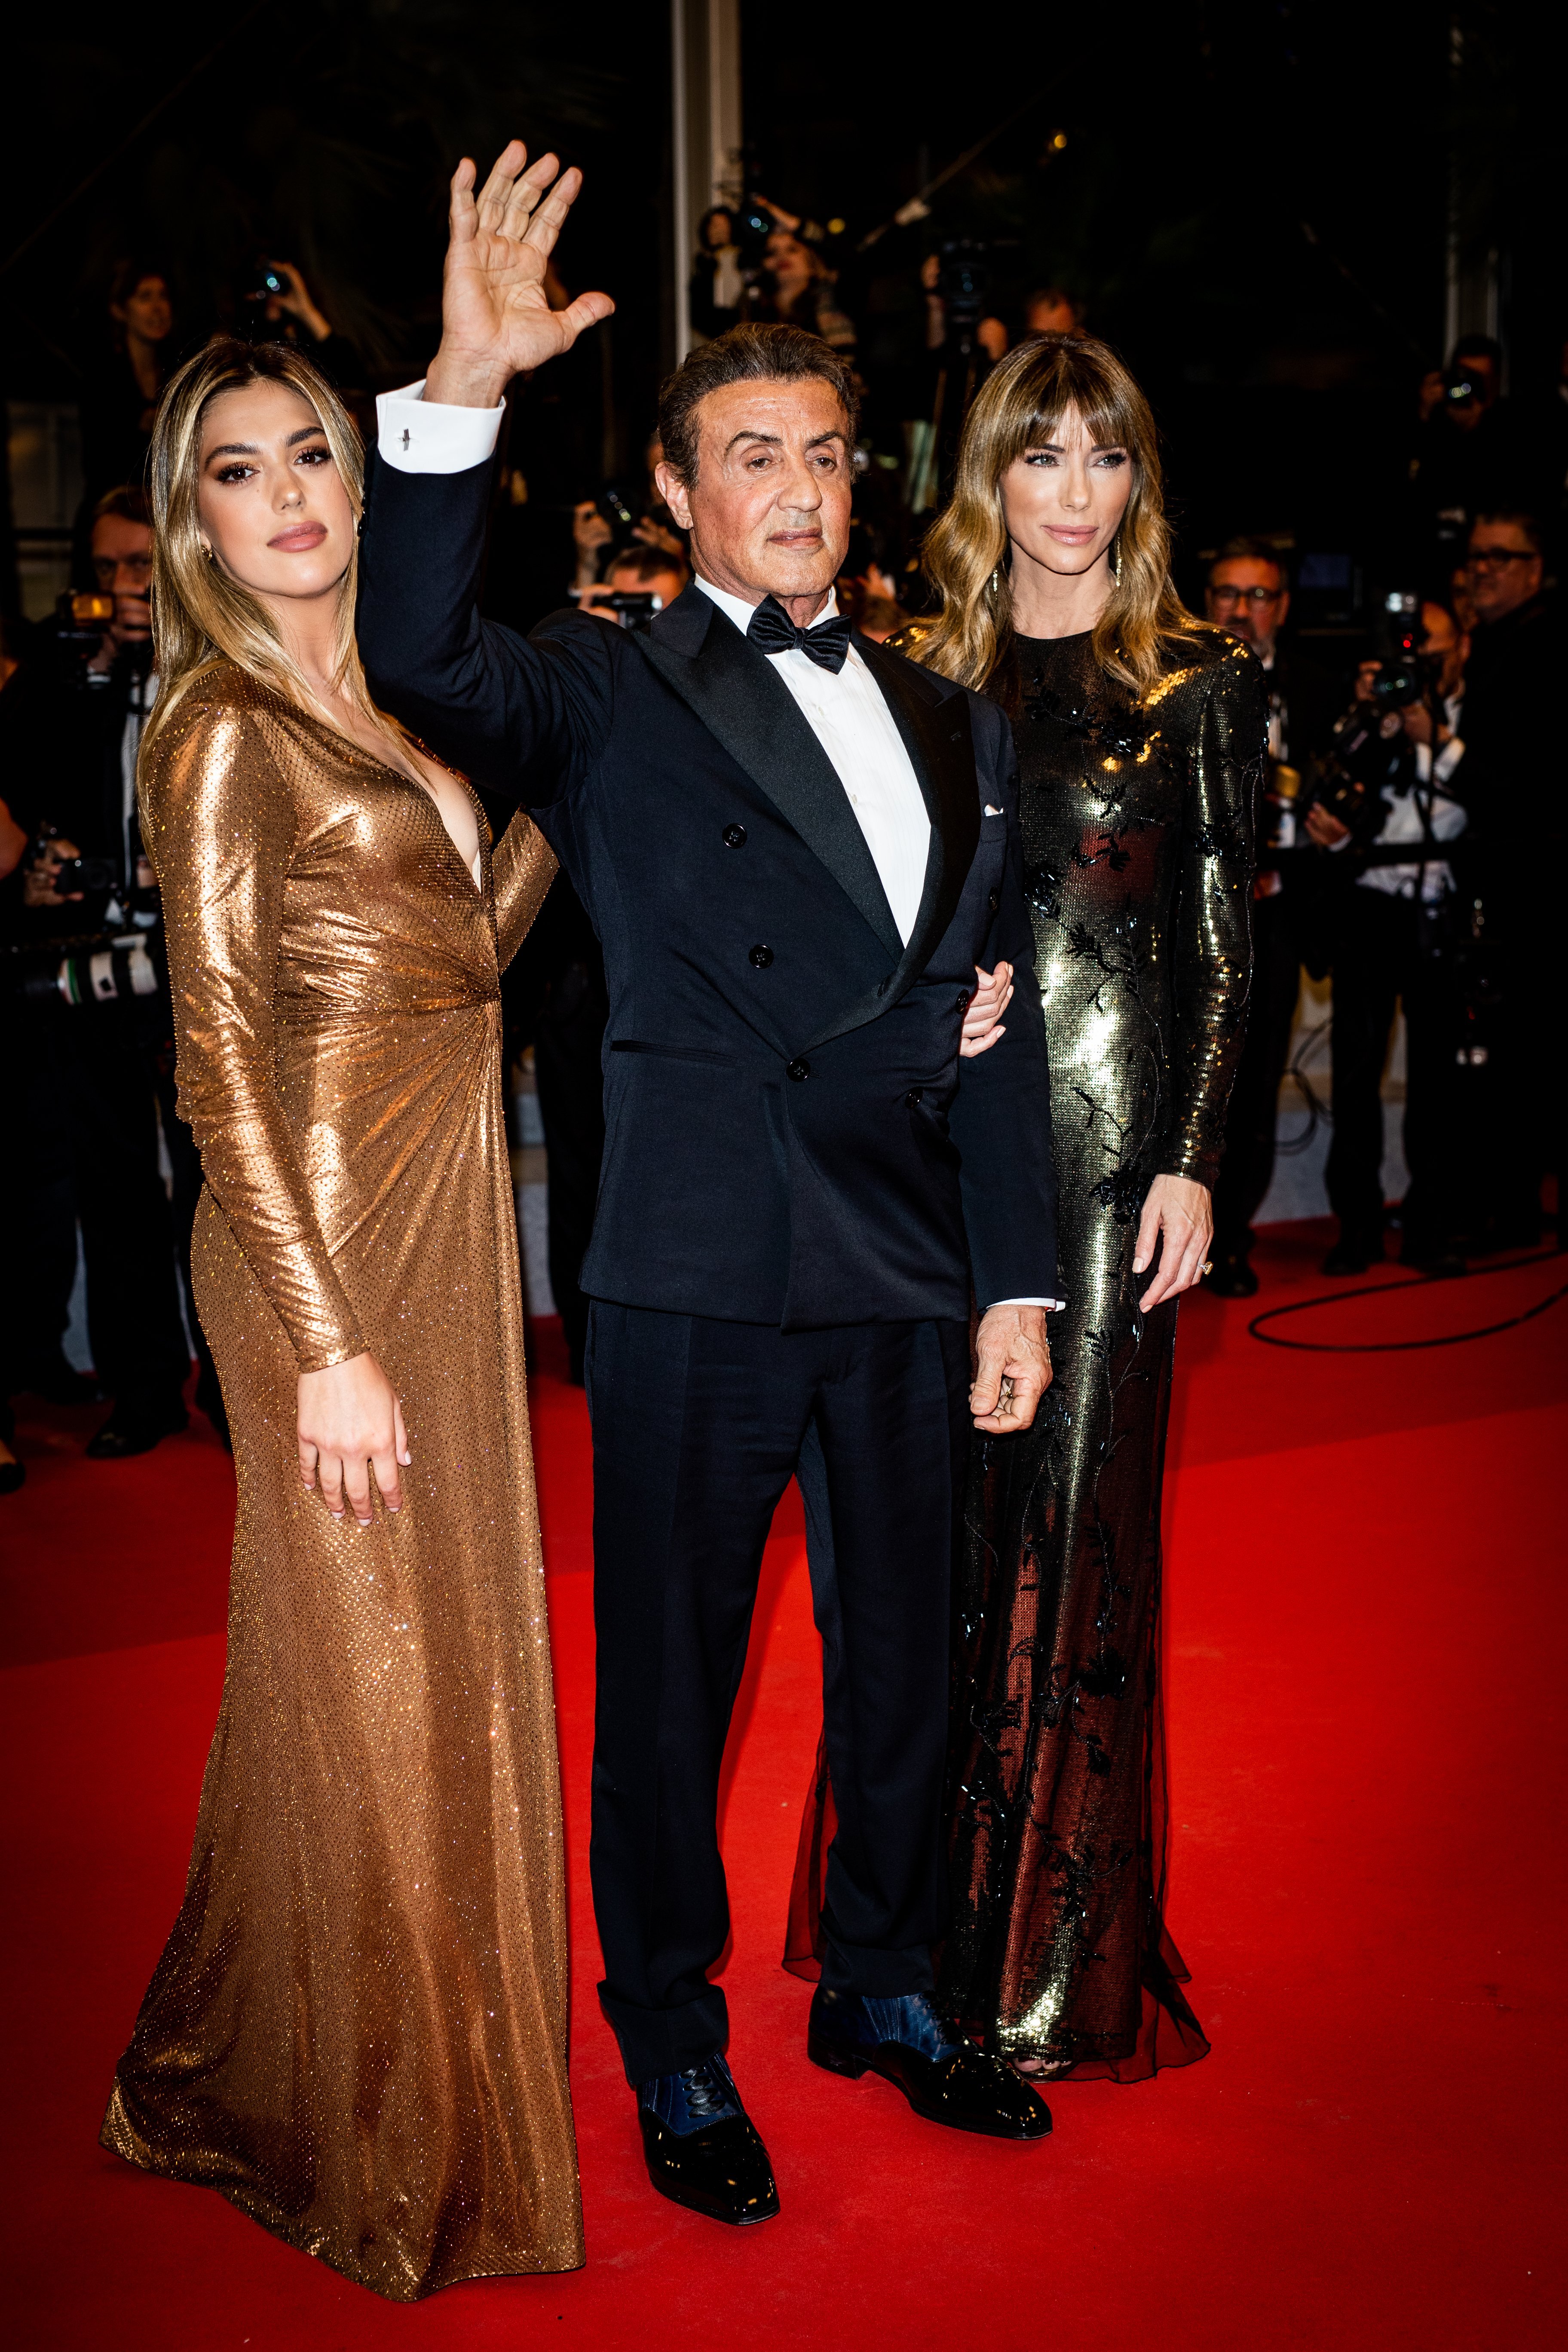 Sylvester Stallone, Jennifer Flavin and Sistine Rose Stallone attend the screening of "Rambo - Last Blood" during the 72nd annual Cannes Film Festival on May 24, 2019, in Cannes, France. | Source: Getty Images.